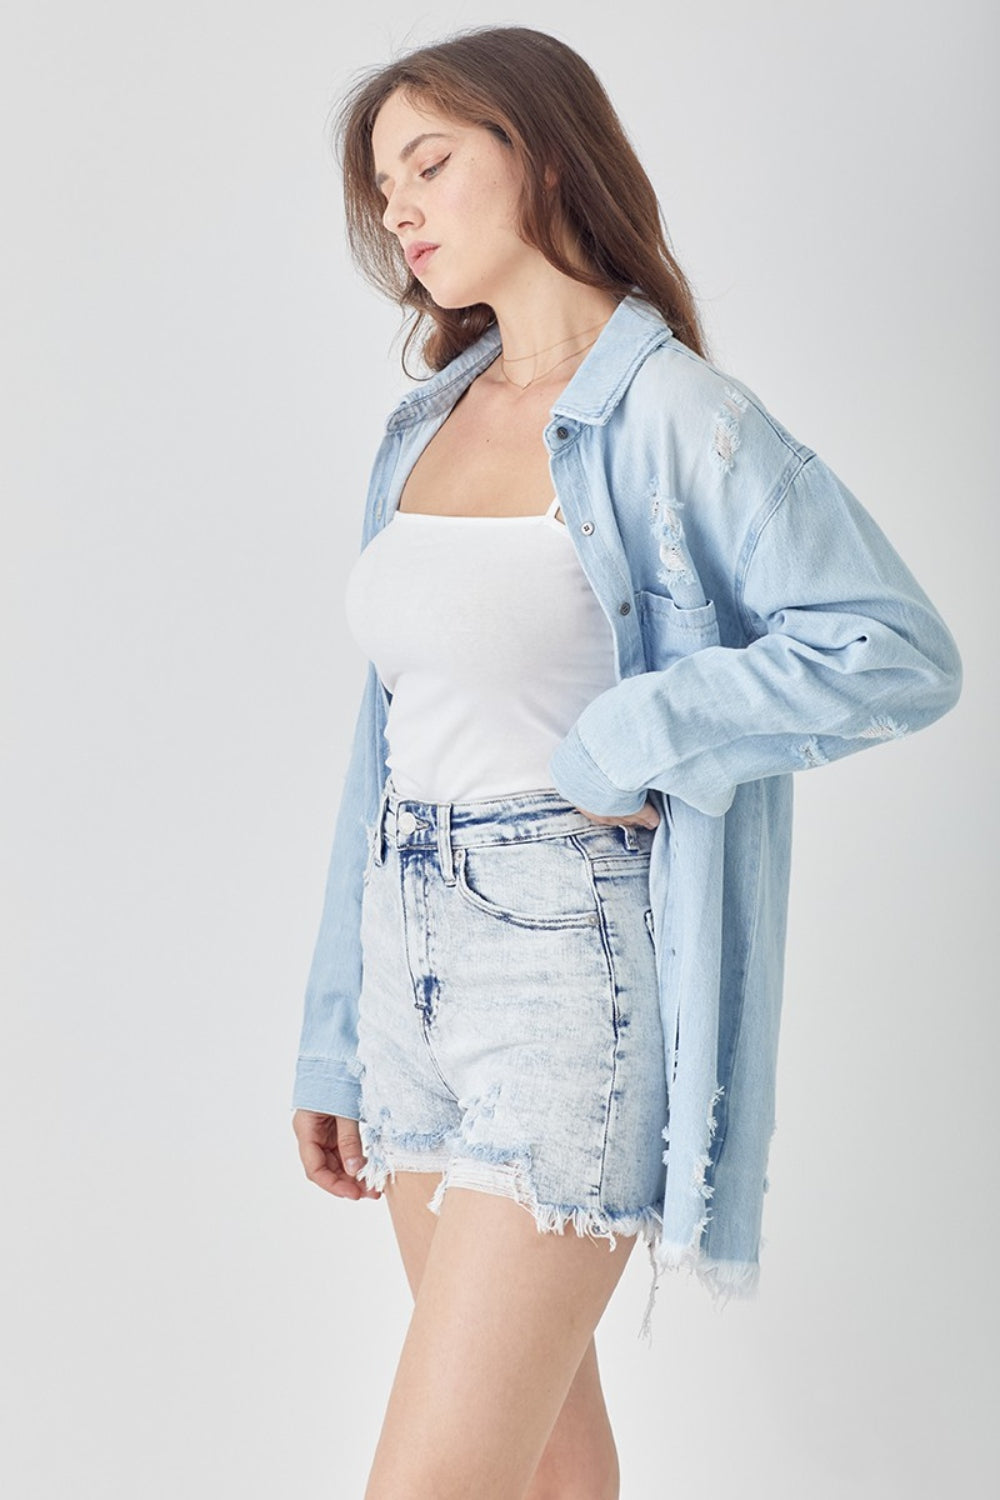 Get trendy with RISEN Raw Hem Distressed High Rise Denim Shorts - Denim Shorts available at Styles Code. Grab yours today!